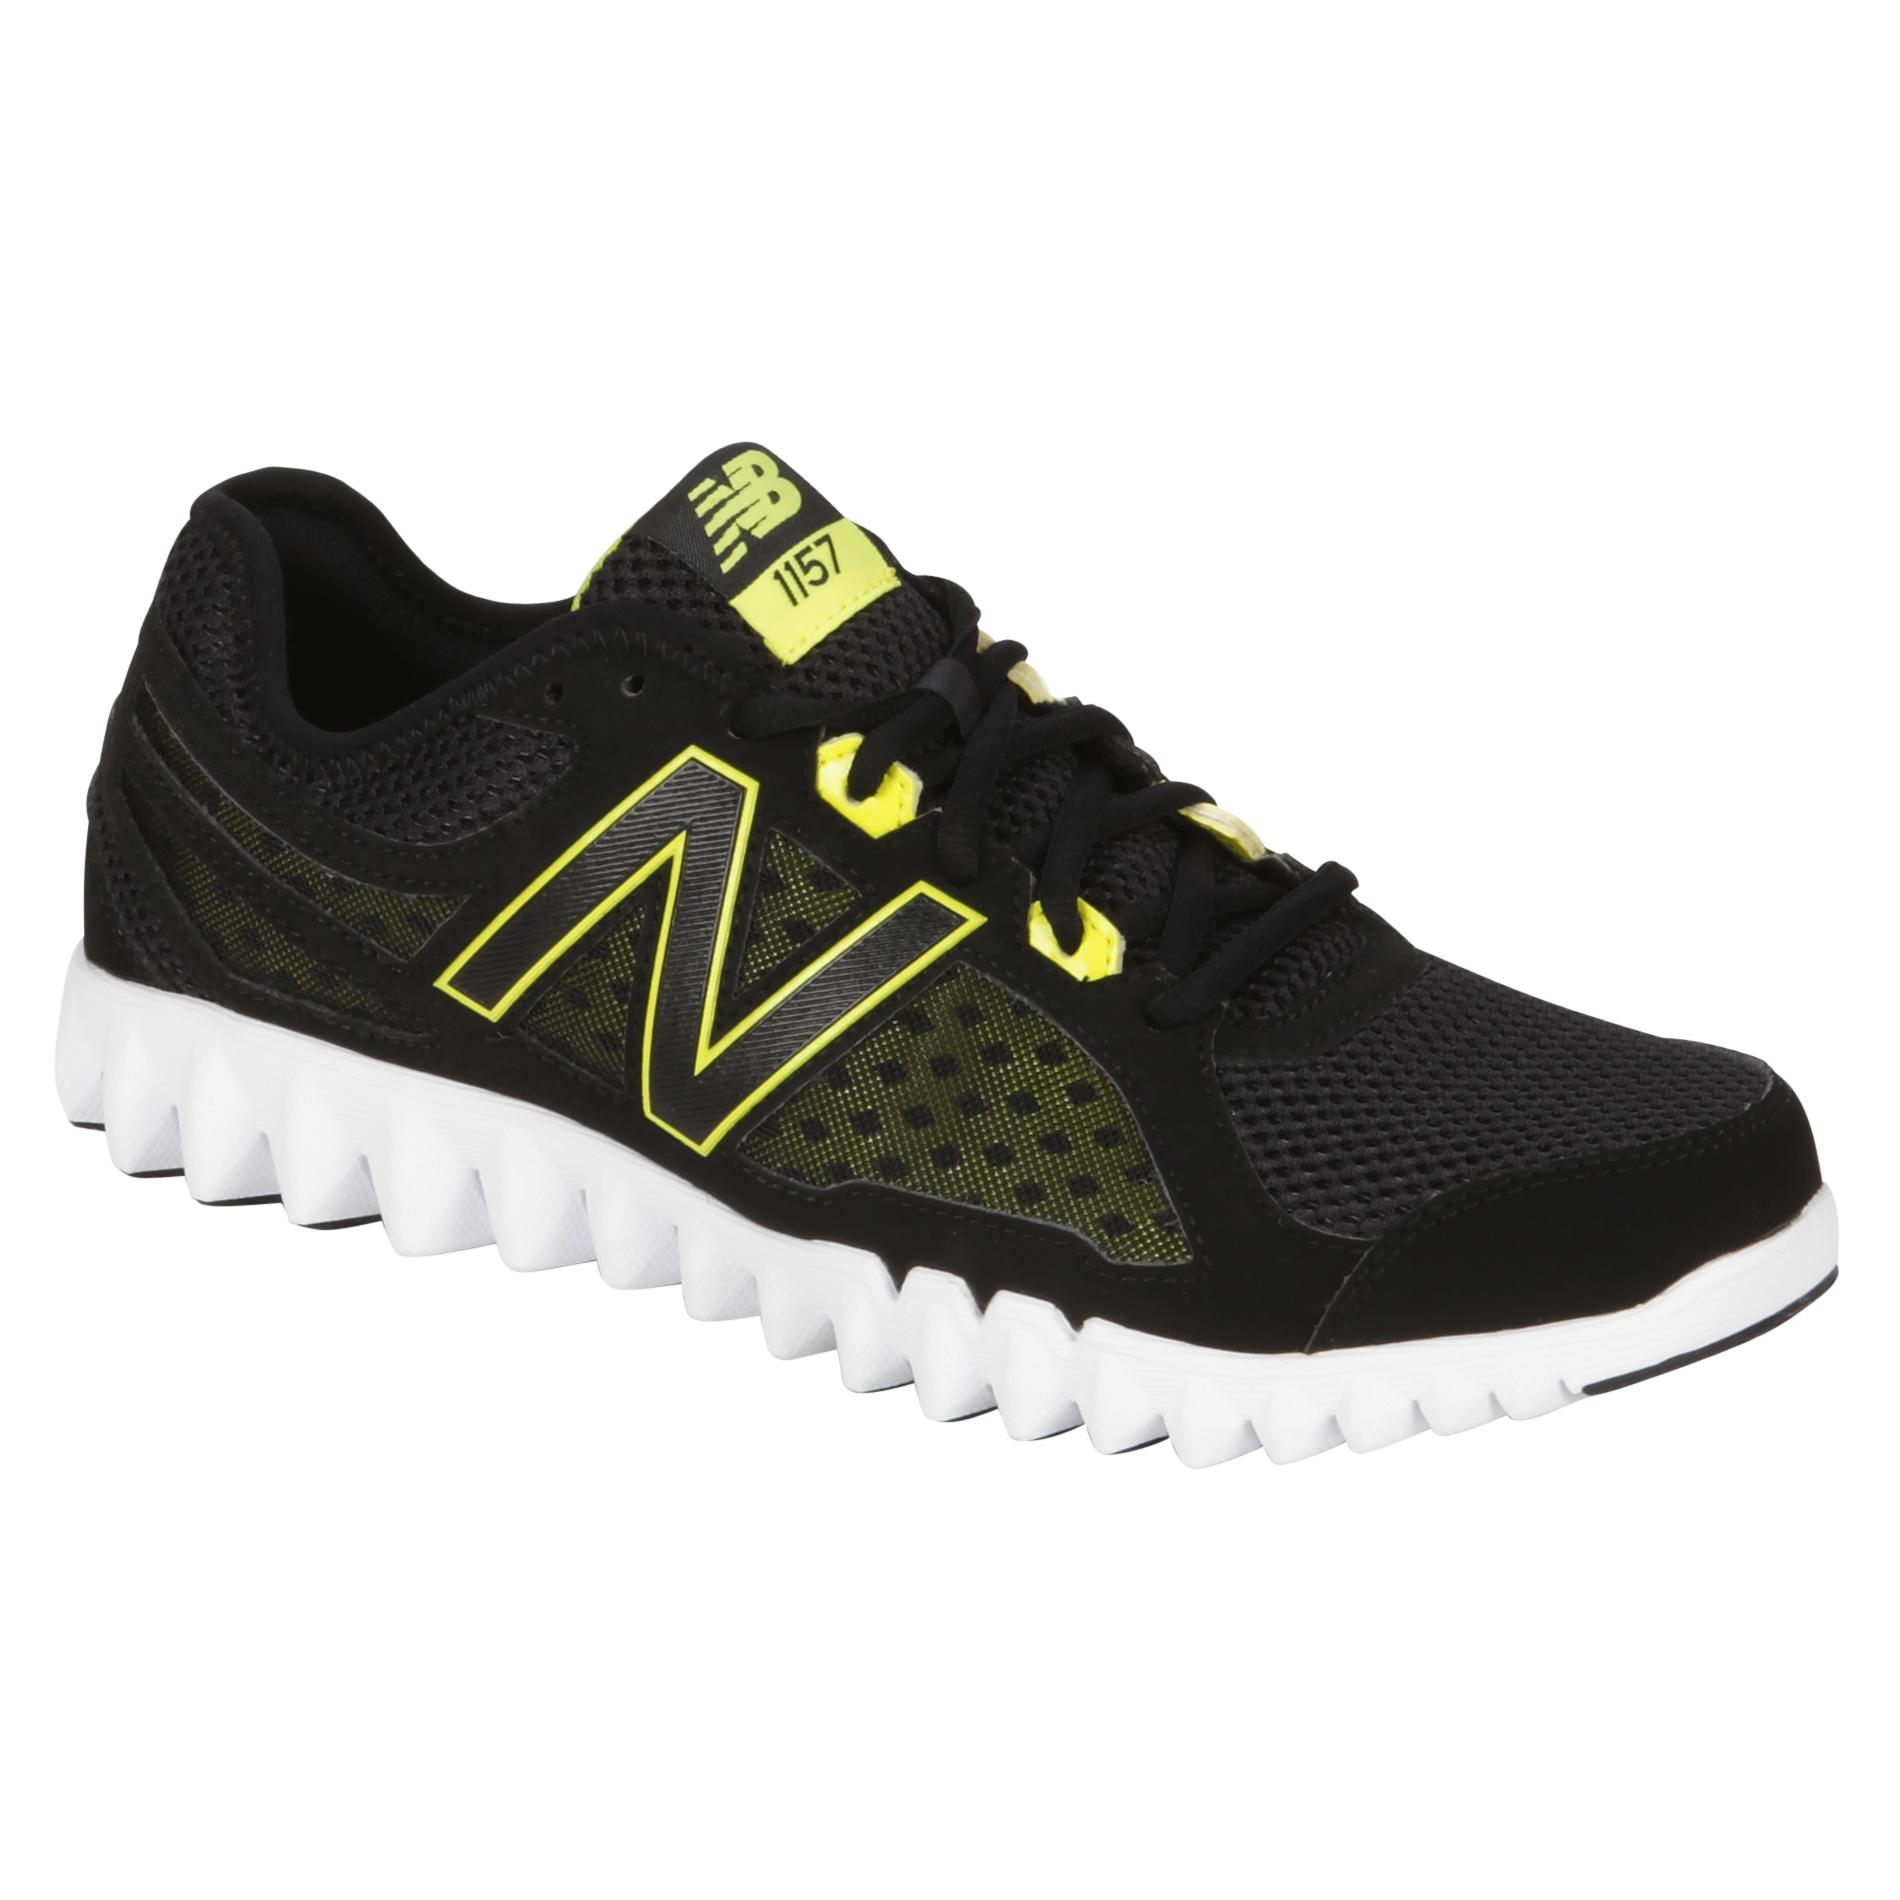 New Balance Men's 1157 Gruve Yellow and Black Mesh Athletic Shoe